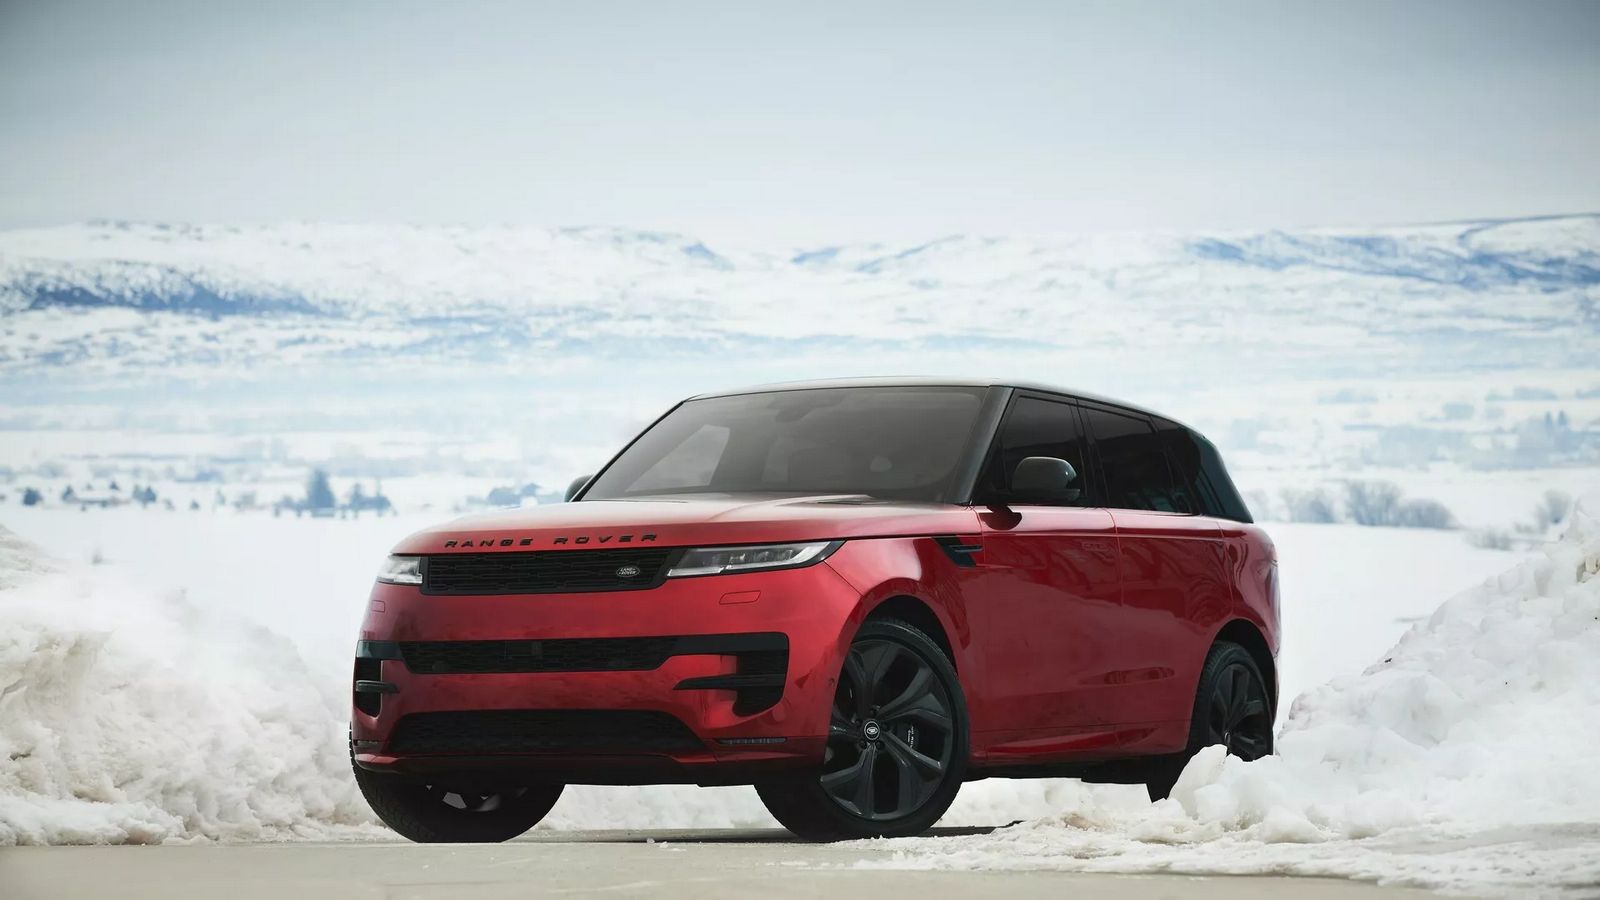 Introducing the Ultimate Ski Enthusiast's Dream Car: The $165,000 Limited Edition Range Rover Sport!